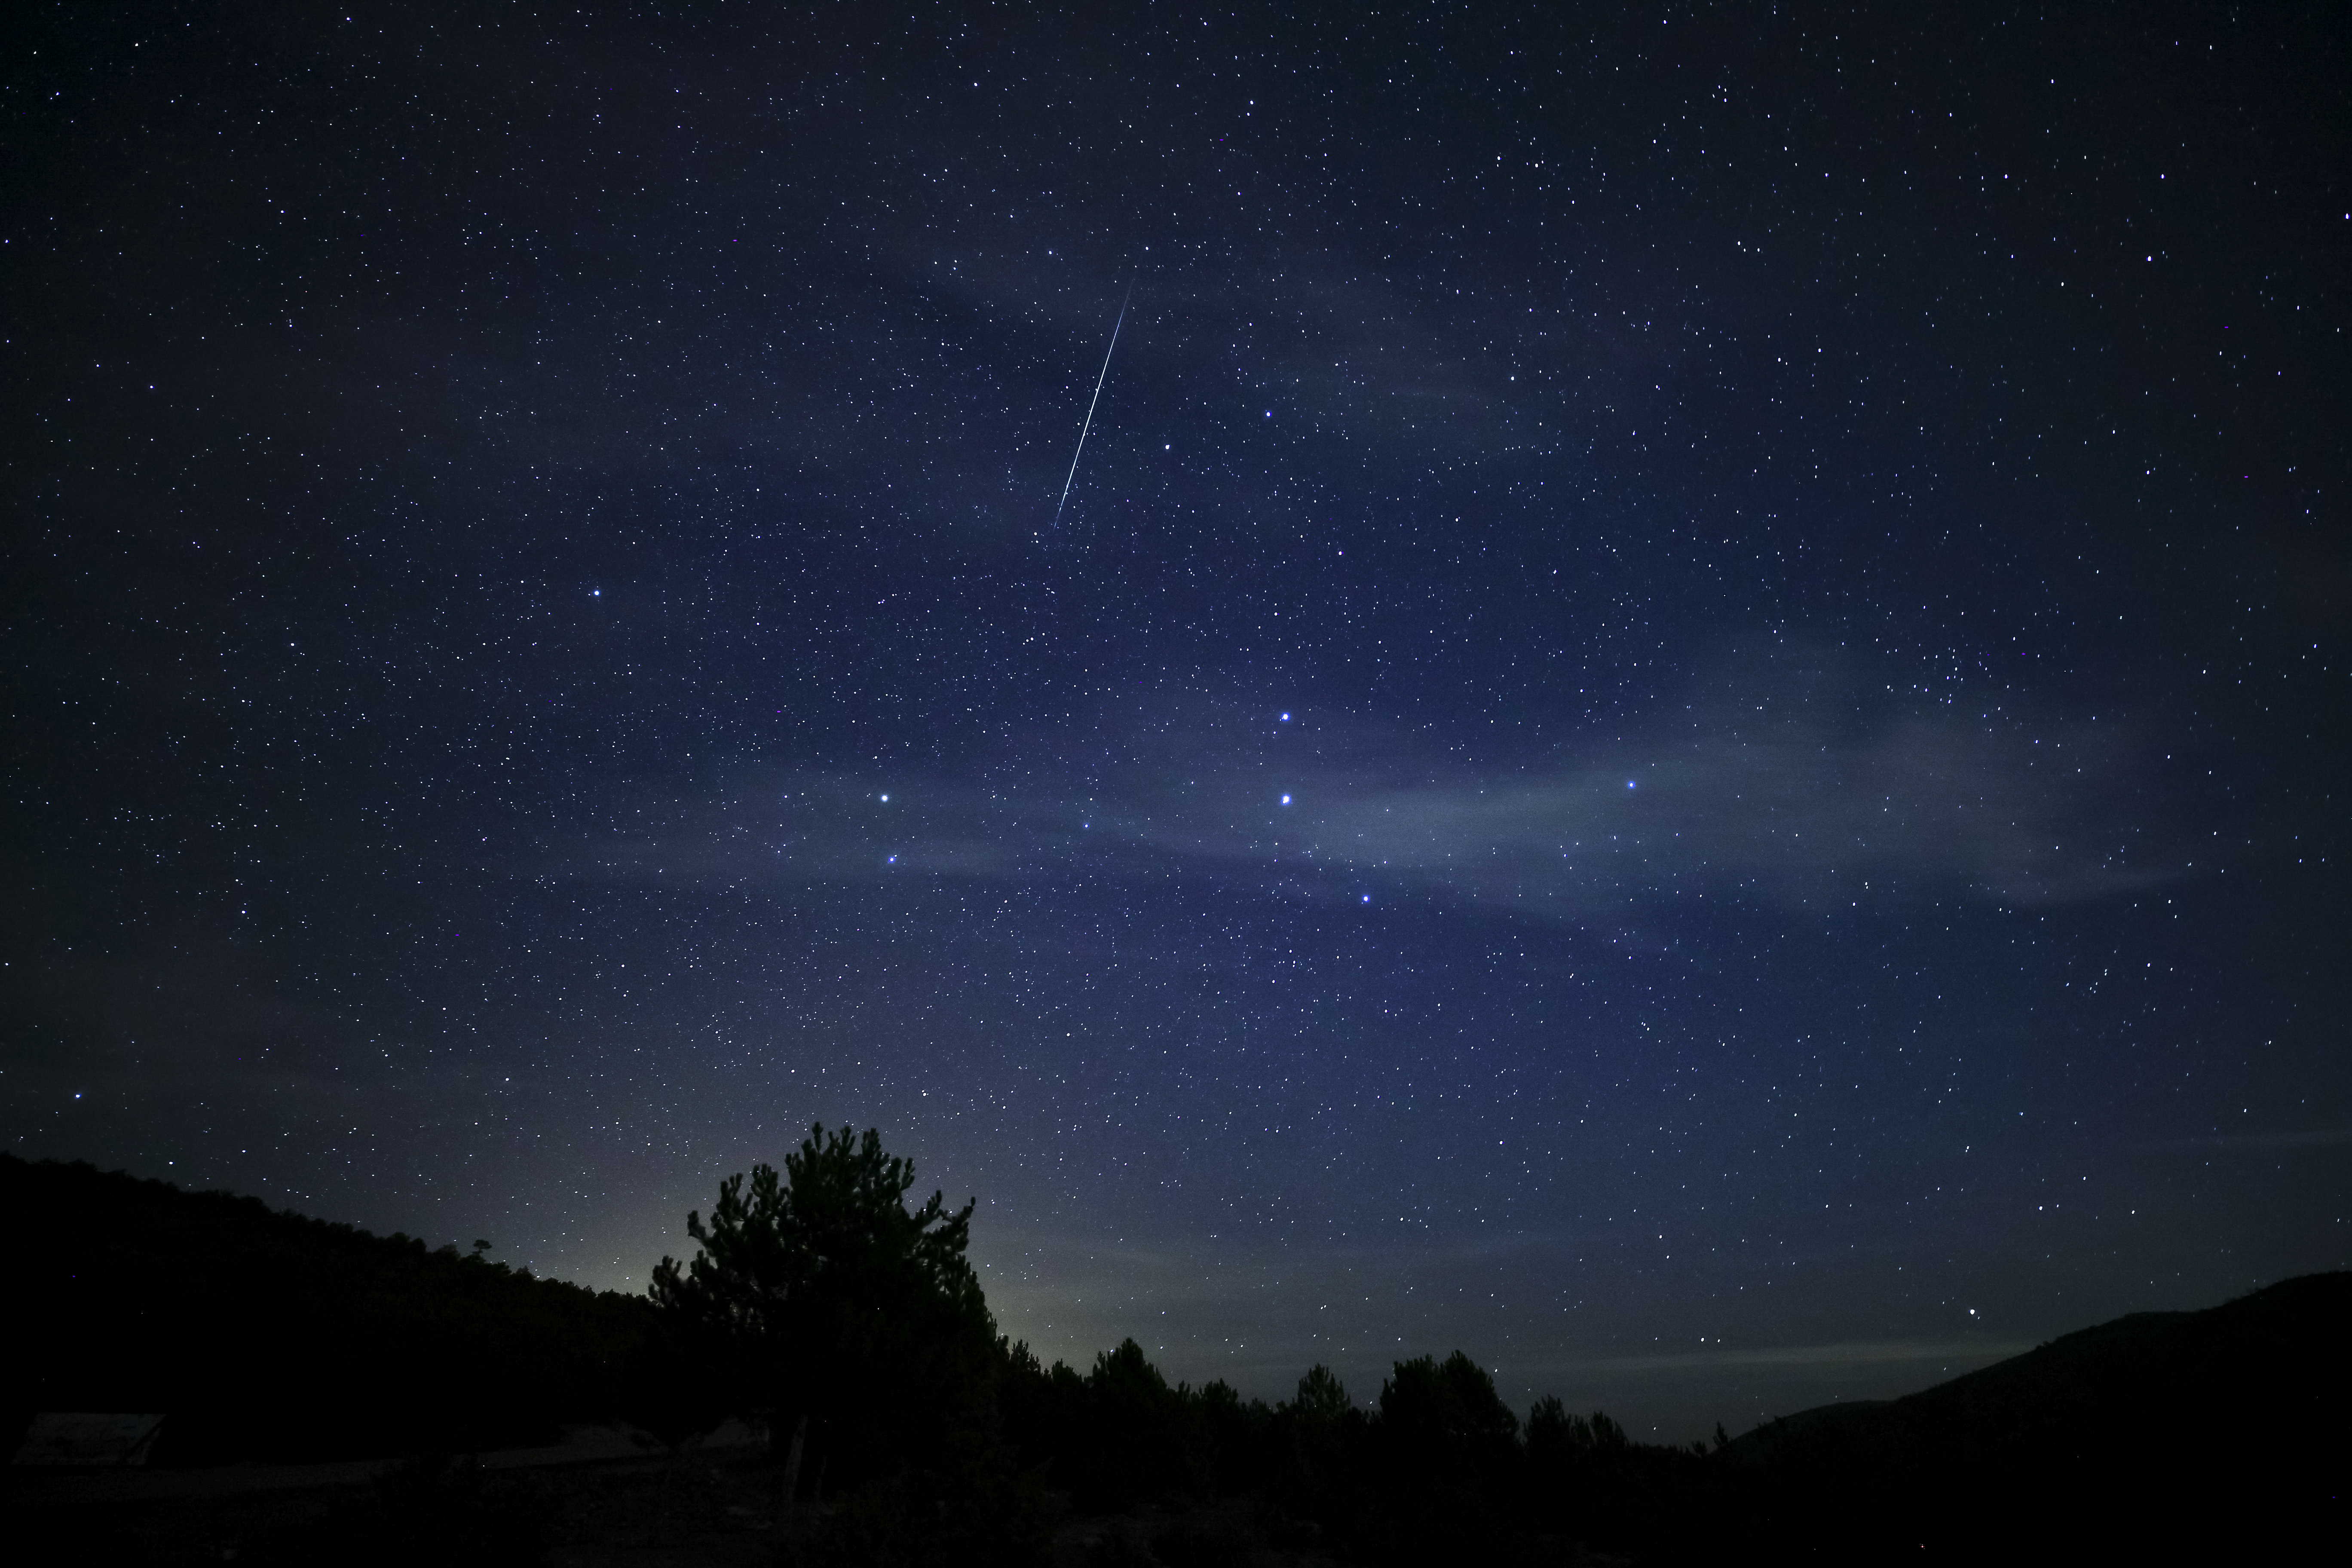 The meteor shower can be seen with the naked eye.